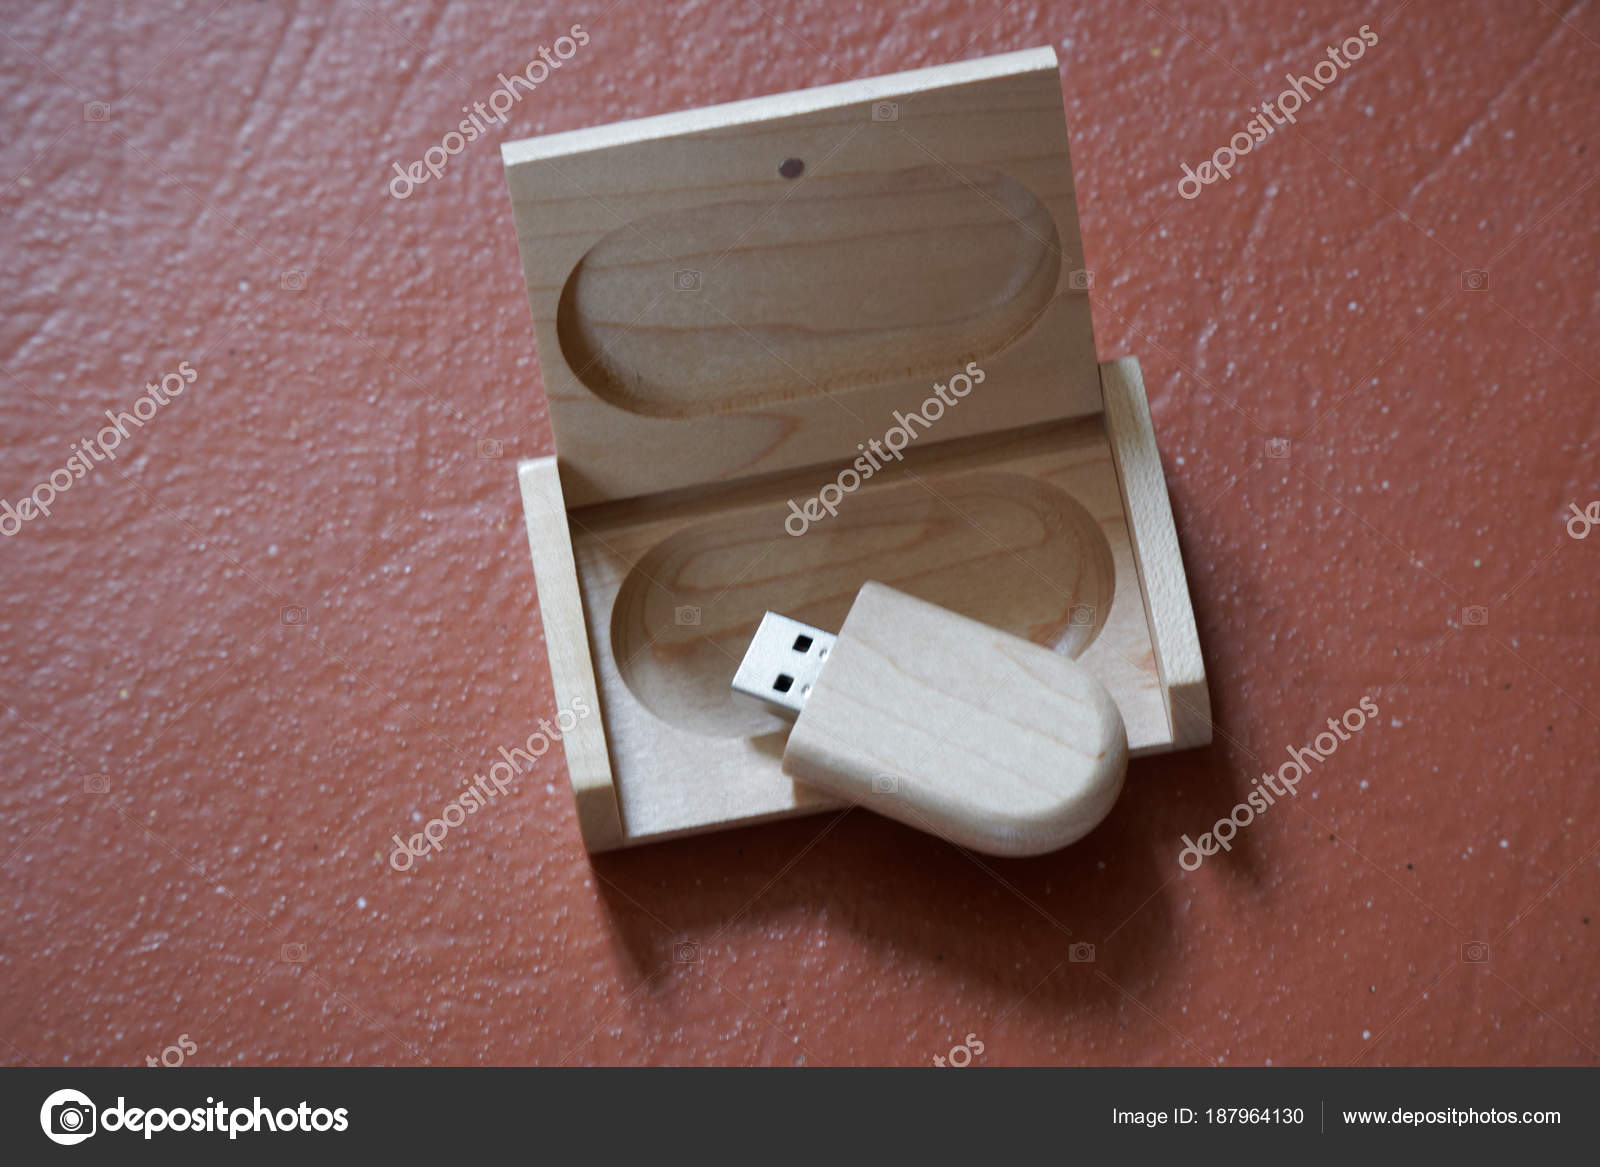 Usb Flash Drive With Wooden Surface In Wooden Box On Desk For Usb